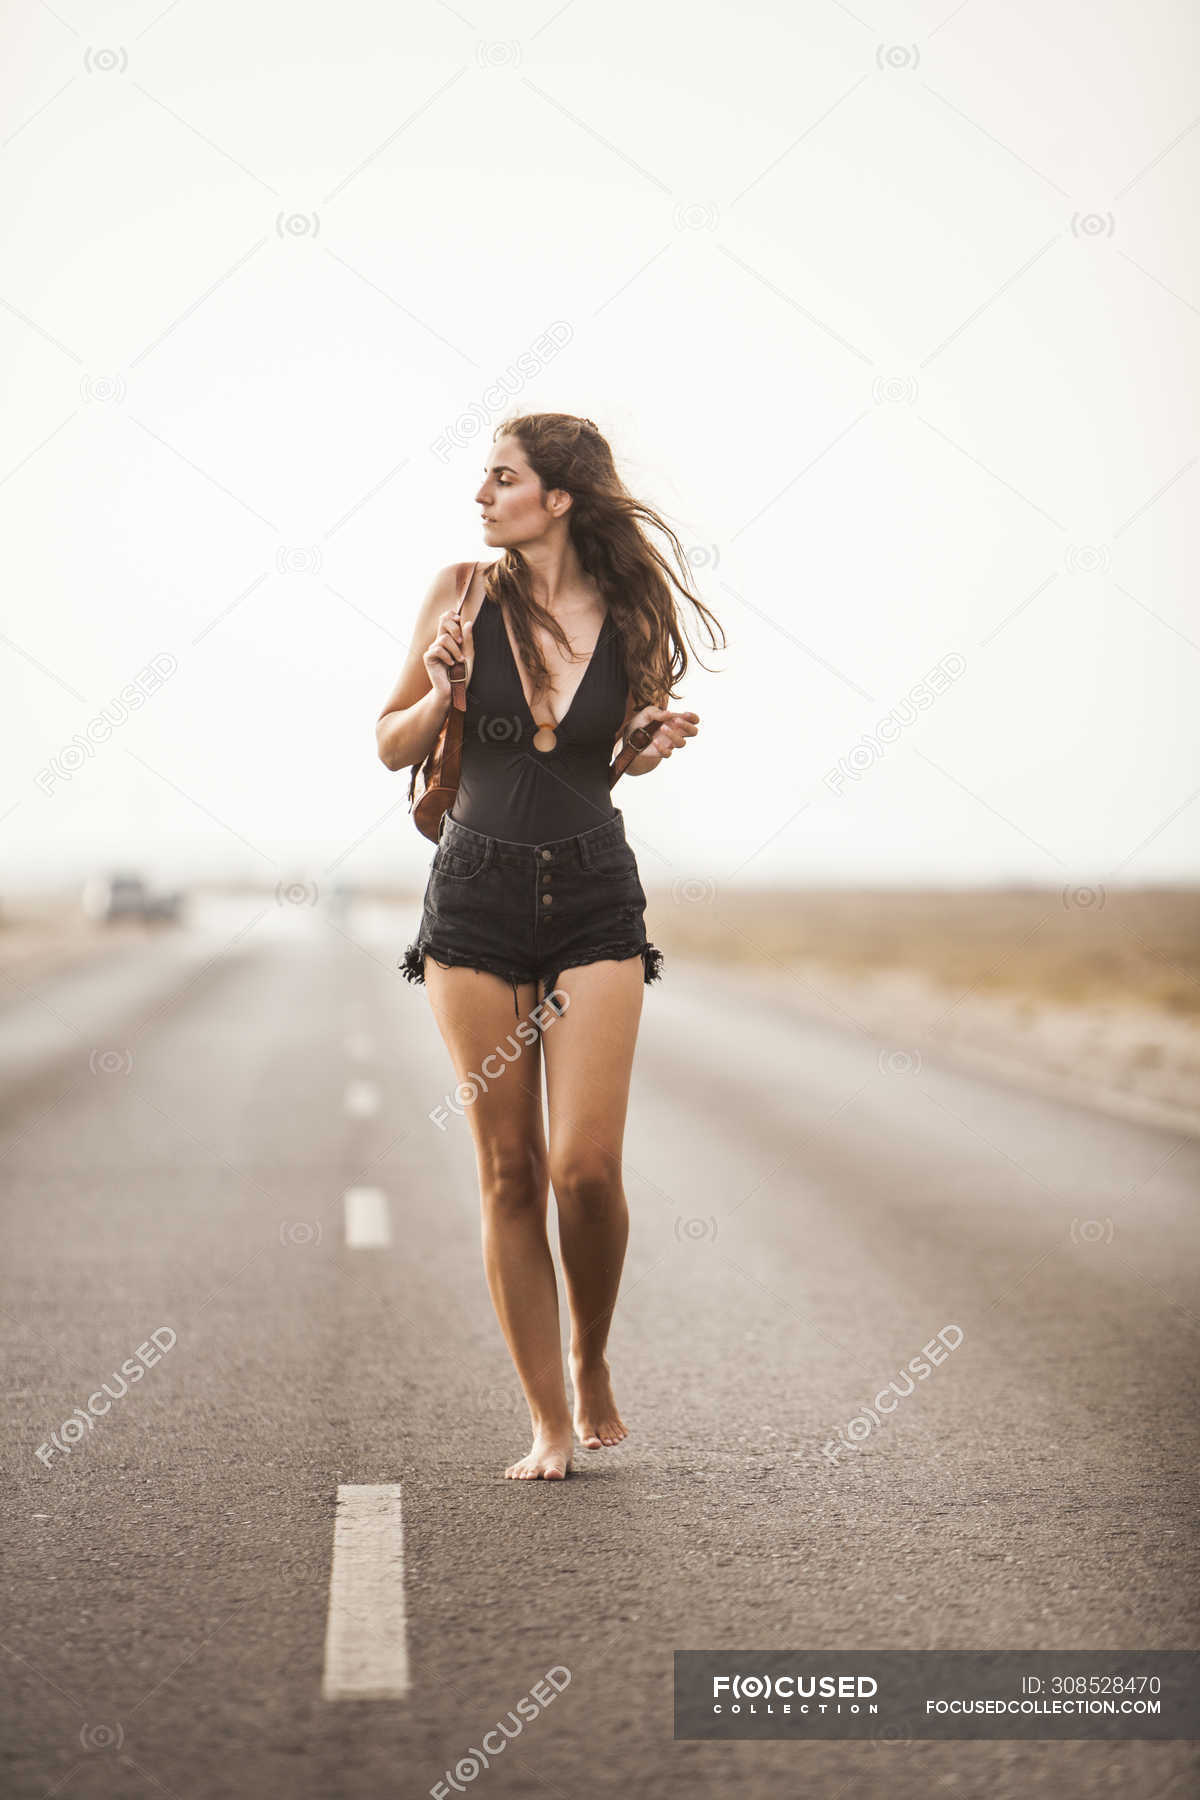 Focused 308528470 Stock Photo Attractive Young Barefoot Woman Walking 